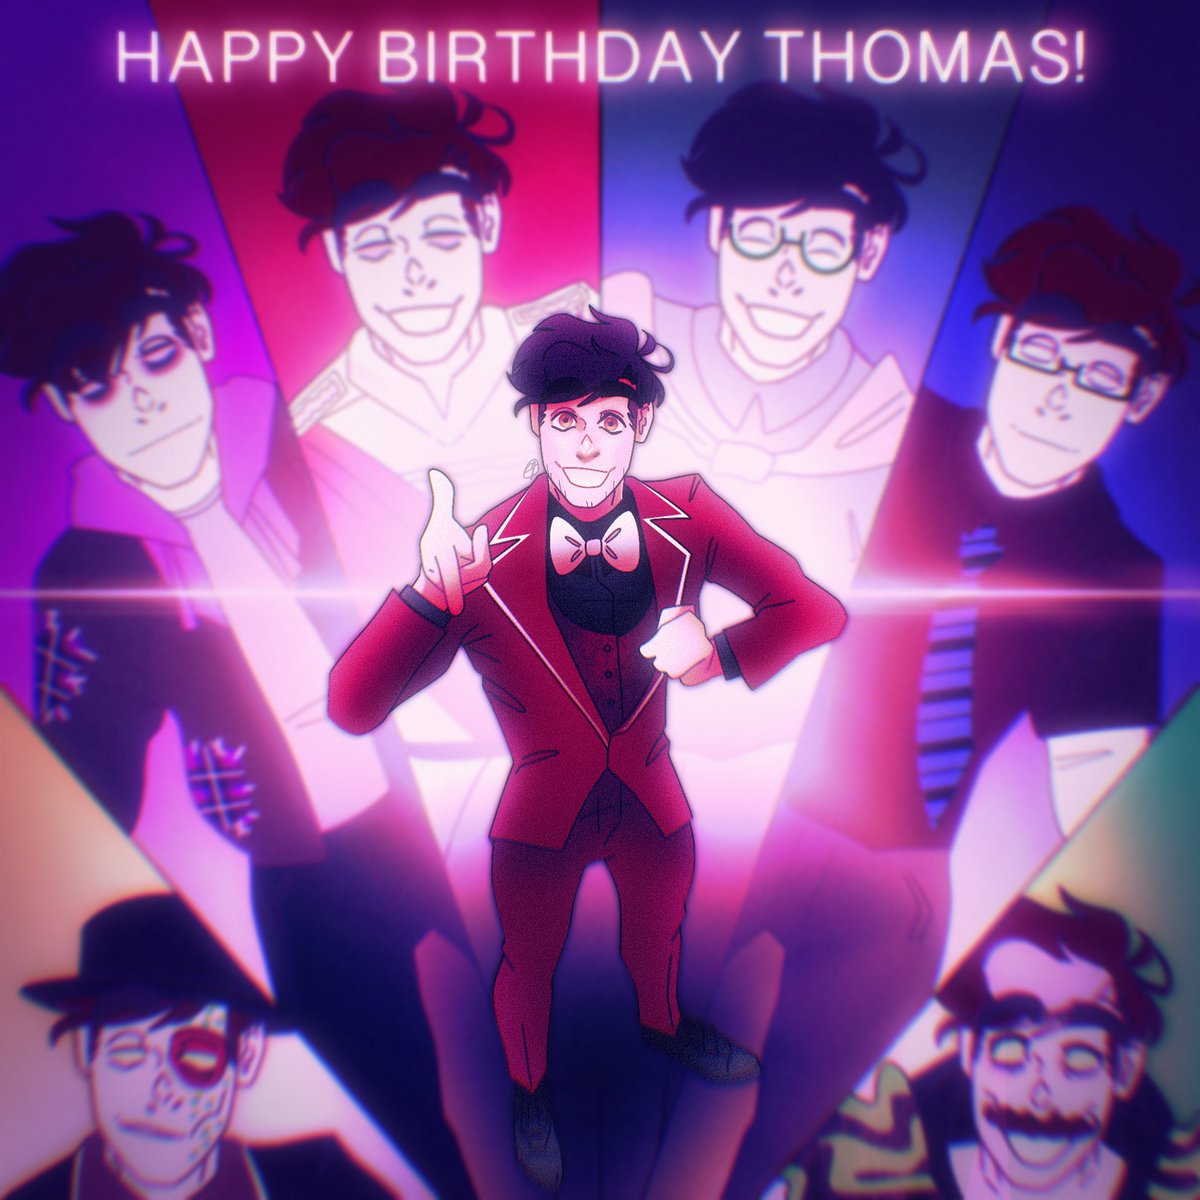 happy birthday thomas!! you’re incredible, always have been, always will be❤️🧡💛💚💙💜🩷 #thomassanders #thomassandersart #sanderssides #sanderssidesart #digitalart @ThomasSanders